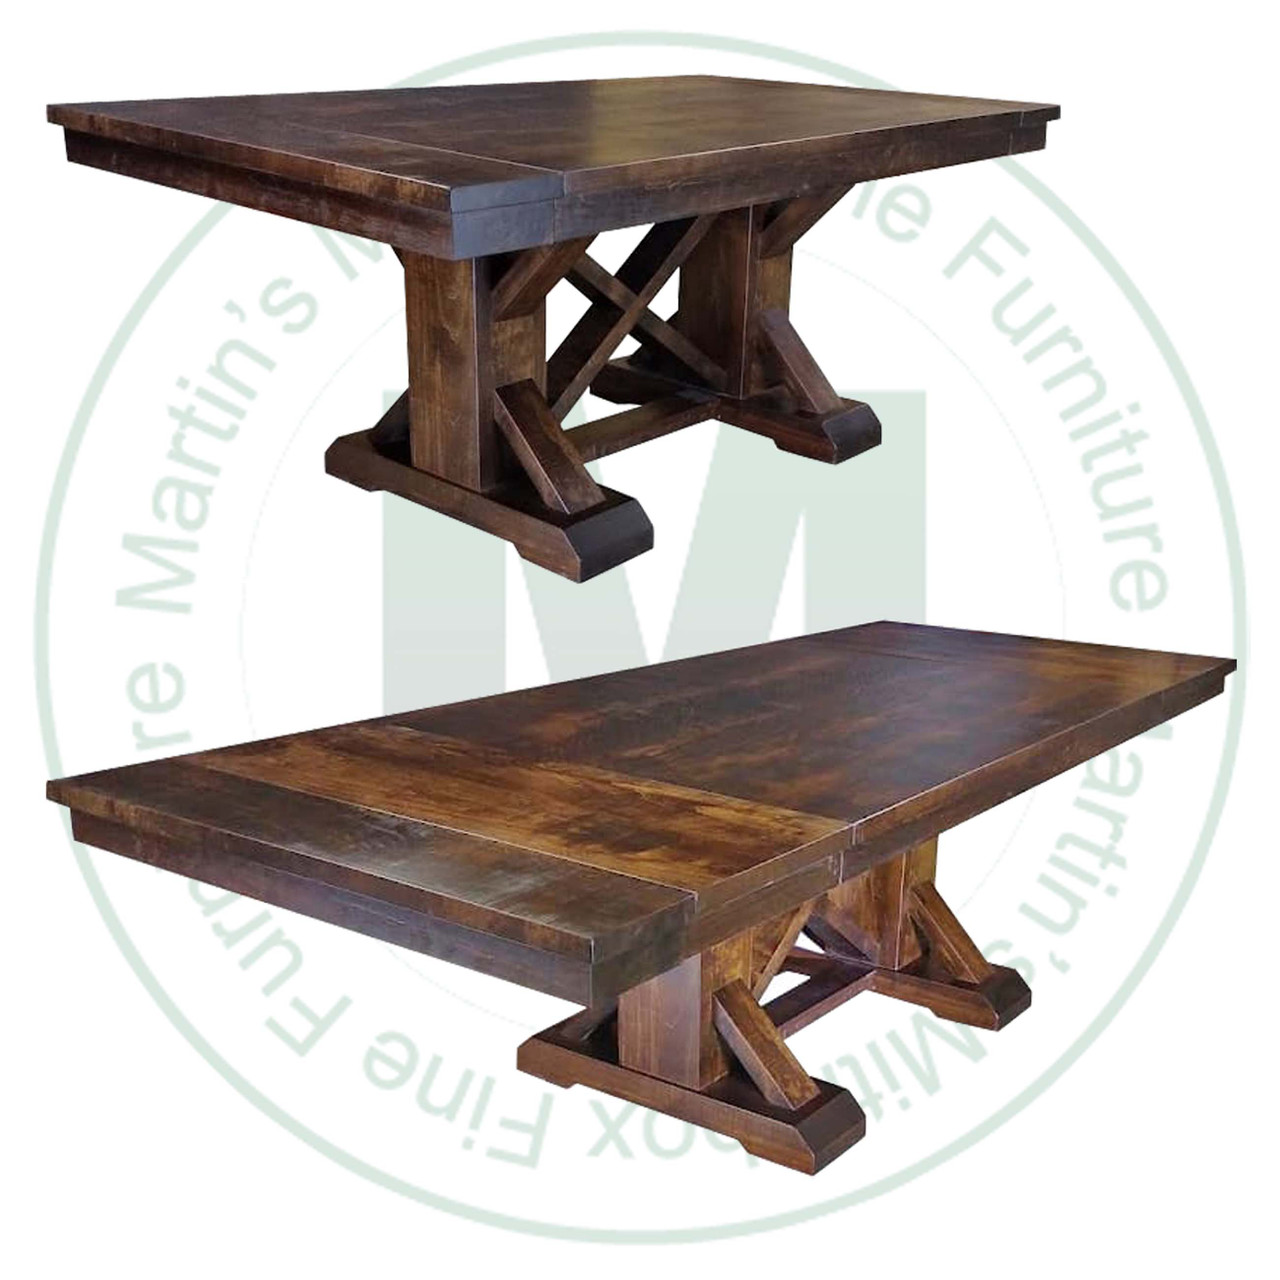 Wormy Maple Bonanza End Extension Pedestal Table 42'' Deep x 72'' Wide x 30'' High With 2 - 16'' End Leaves